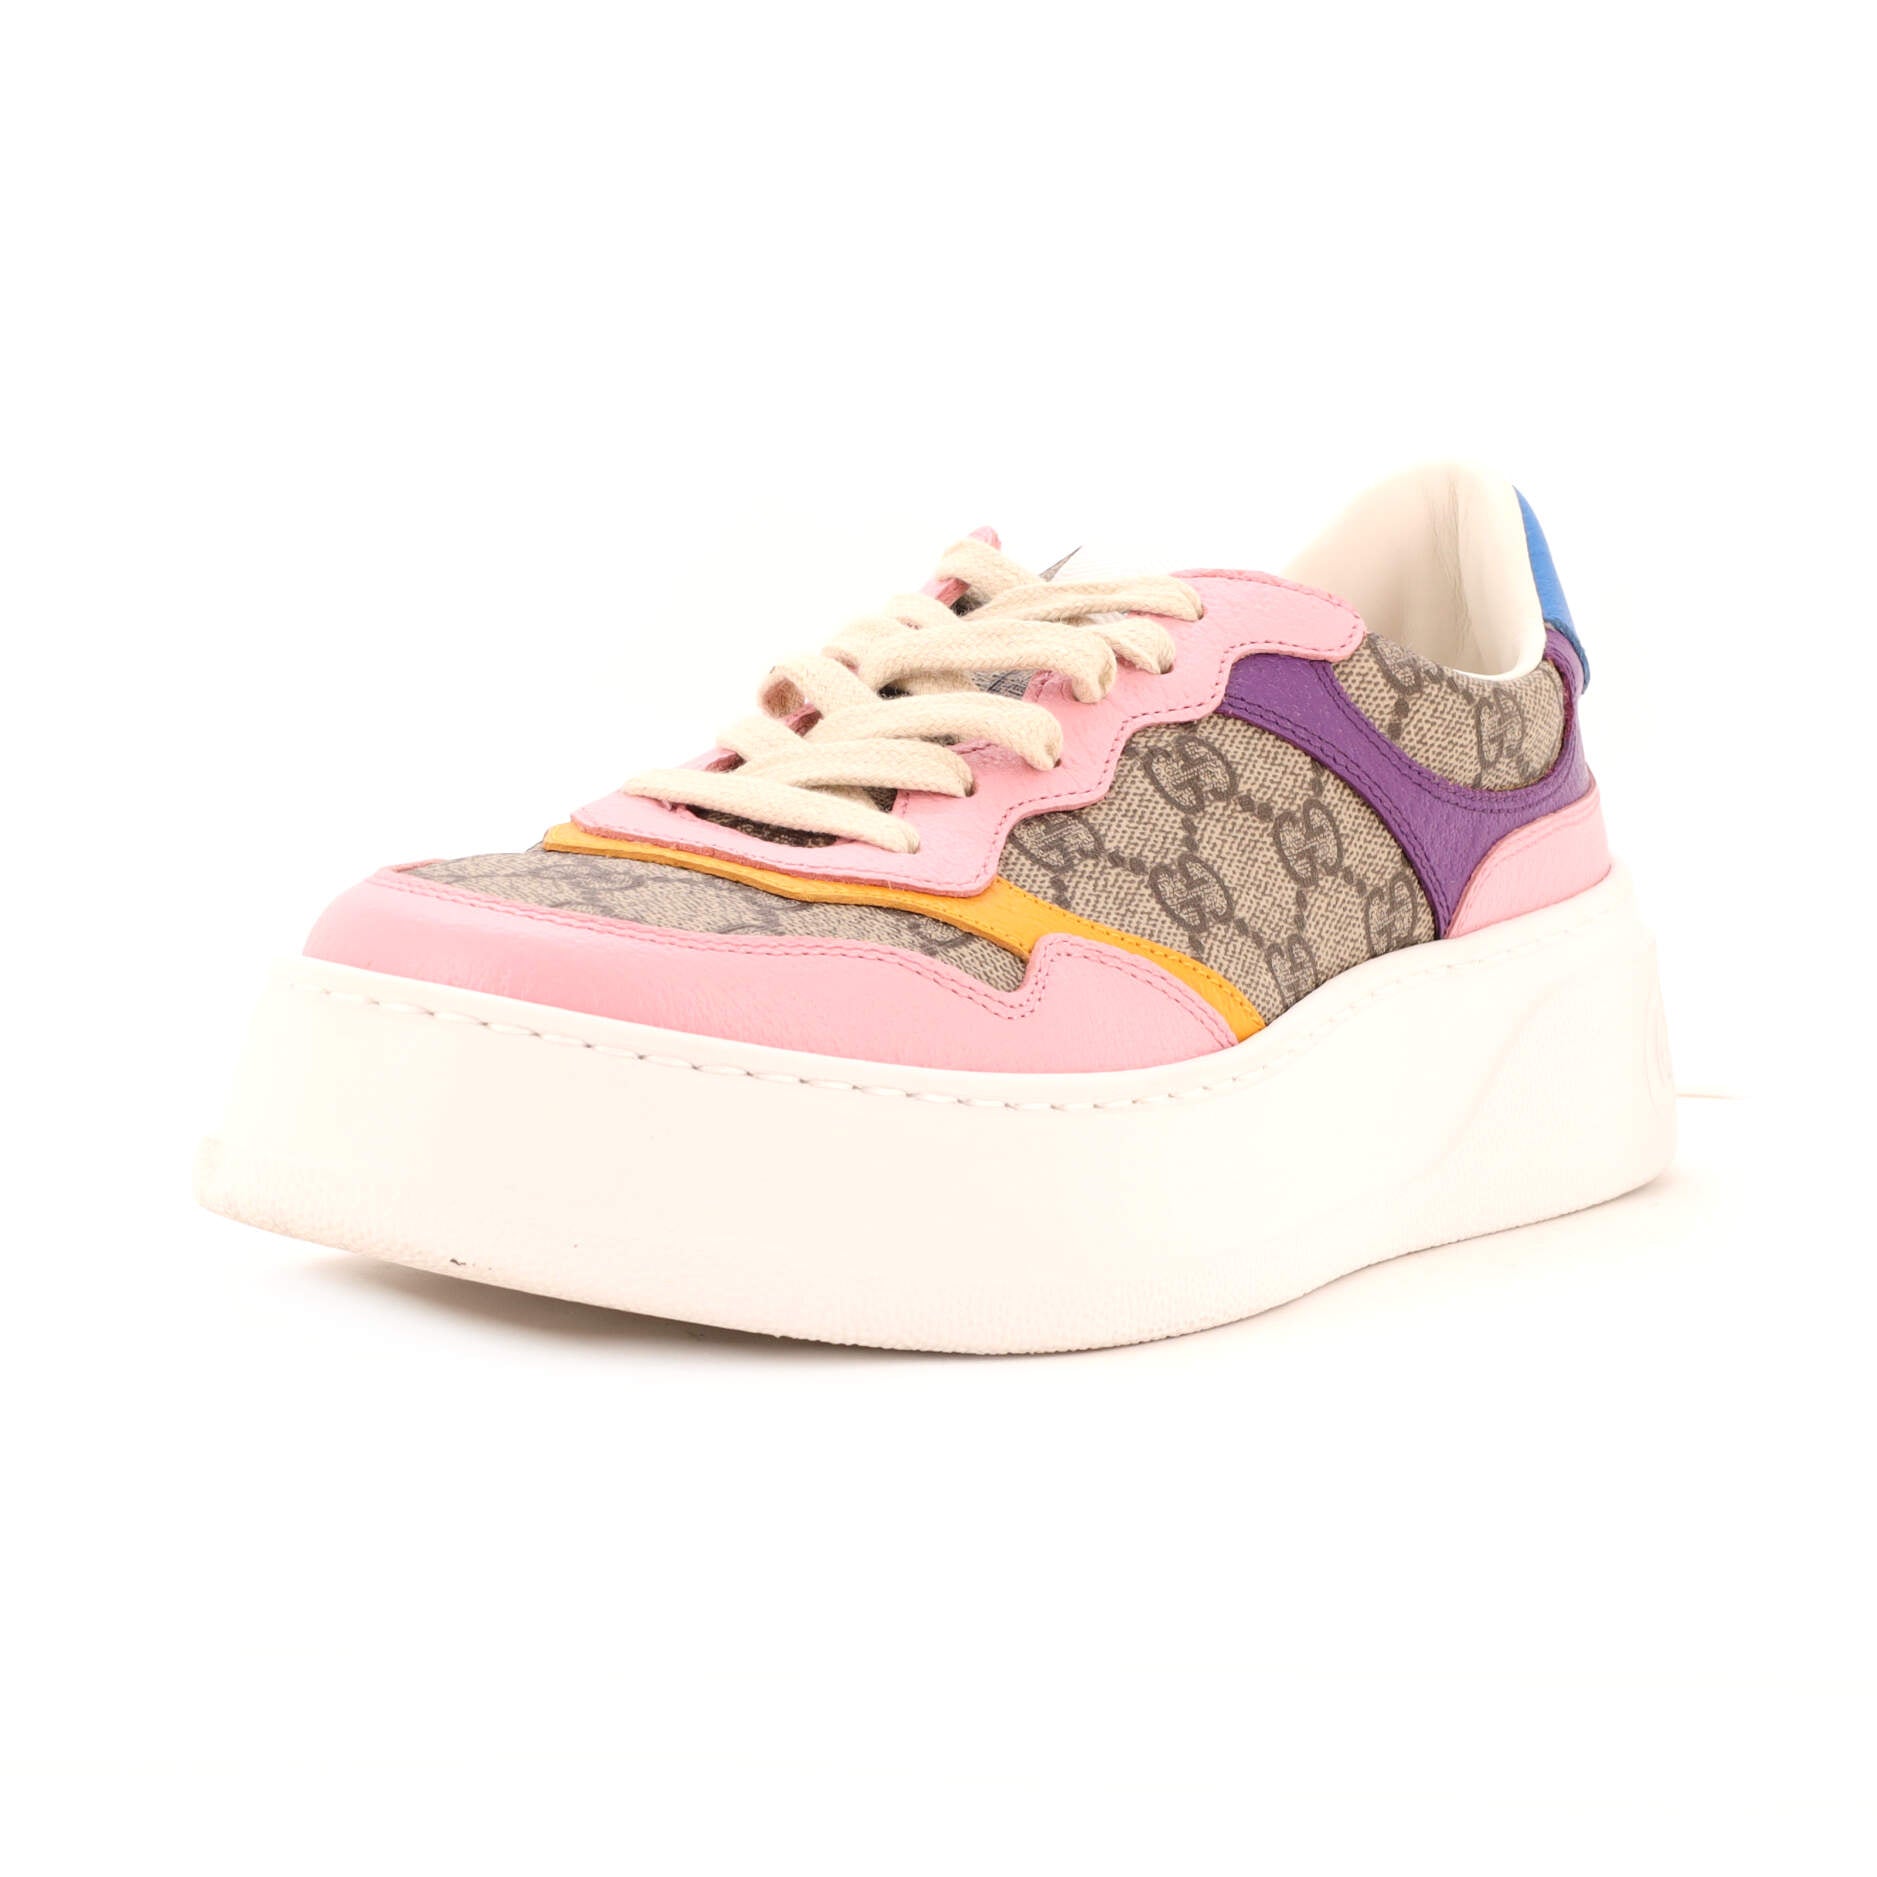 Women's Dali Platform Sneakers GG Canvas with Leather